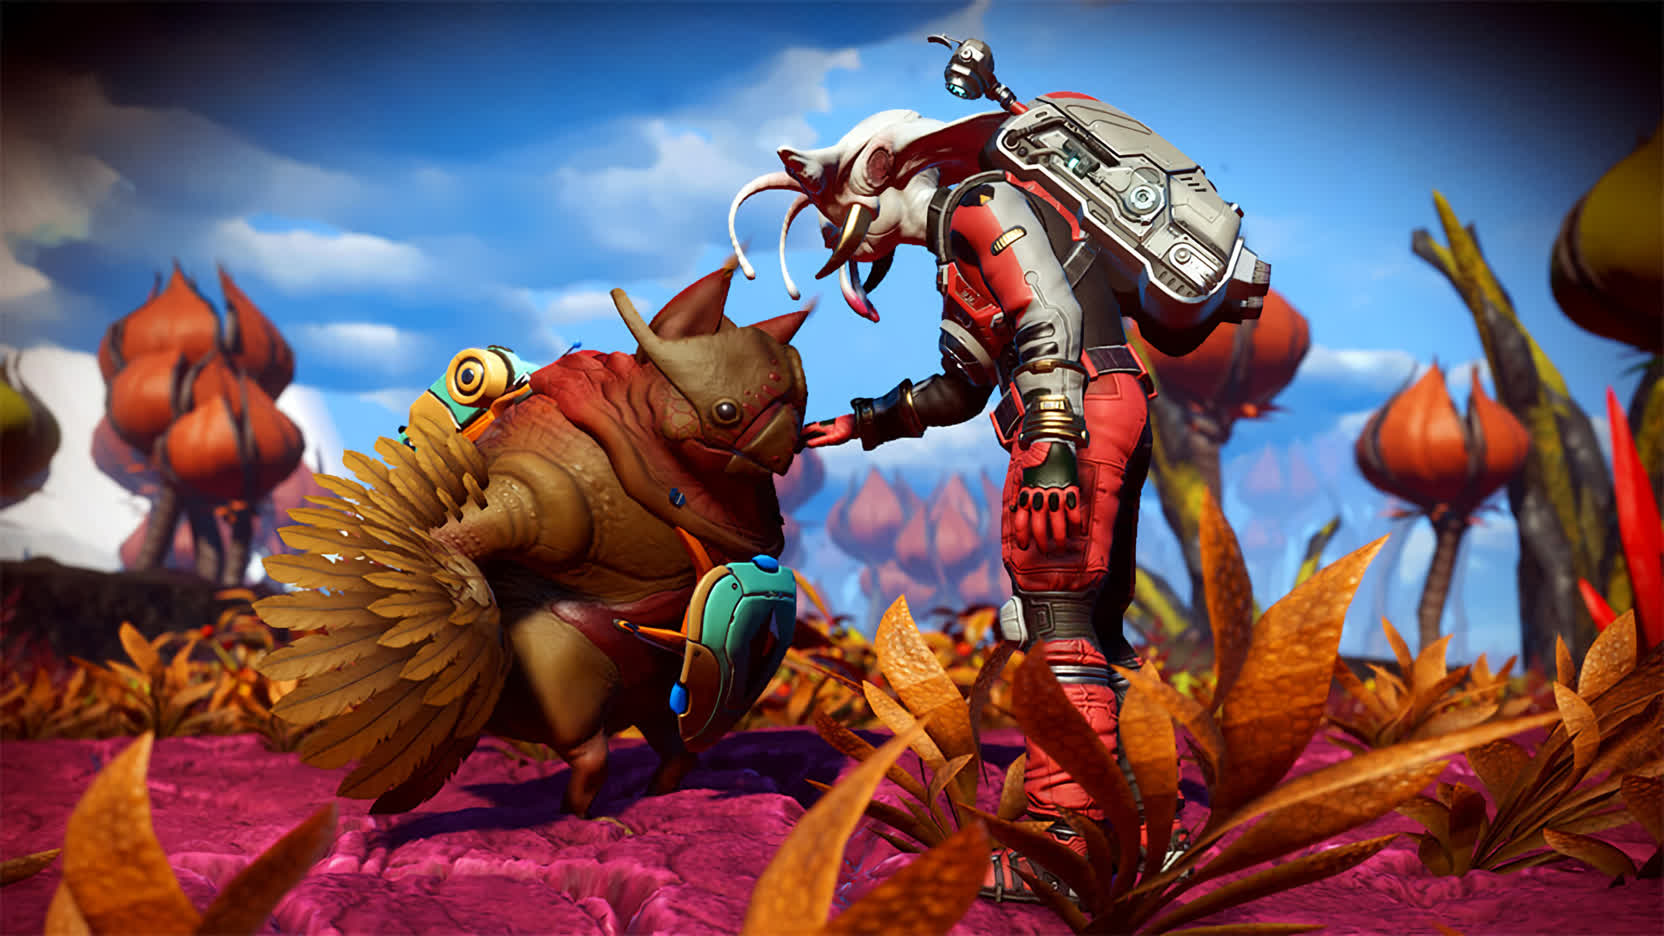 No Man's Sky update lets you adopt creatures as pets